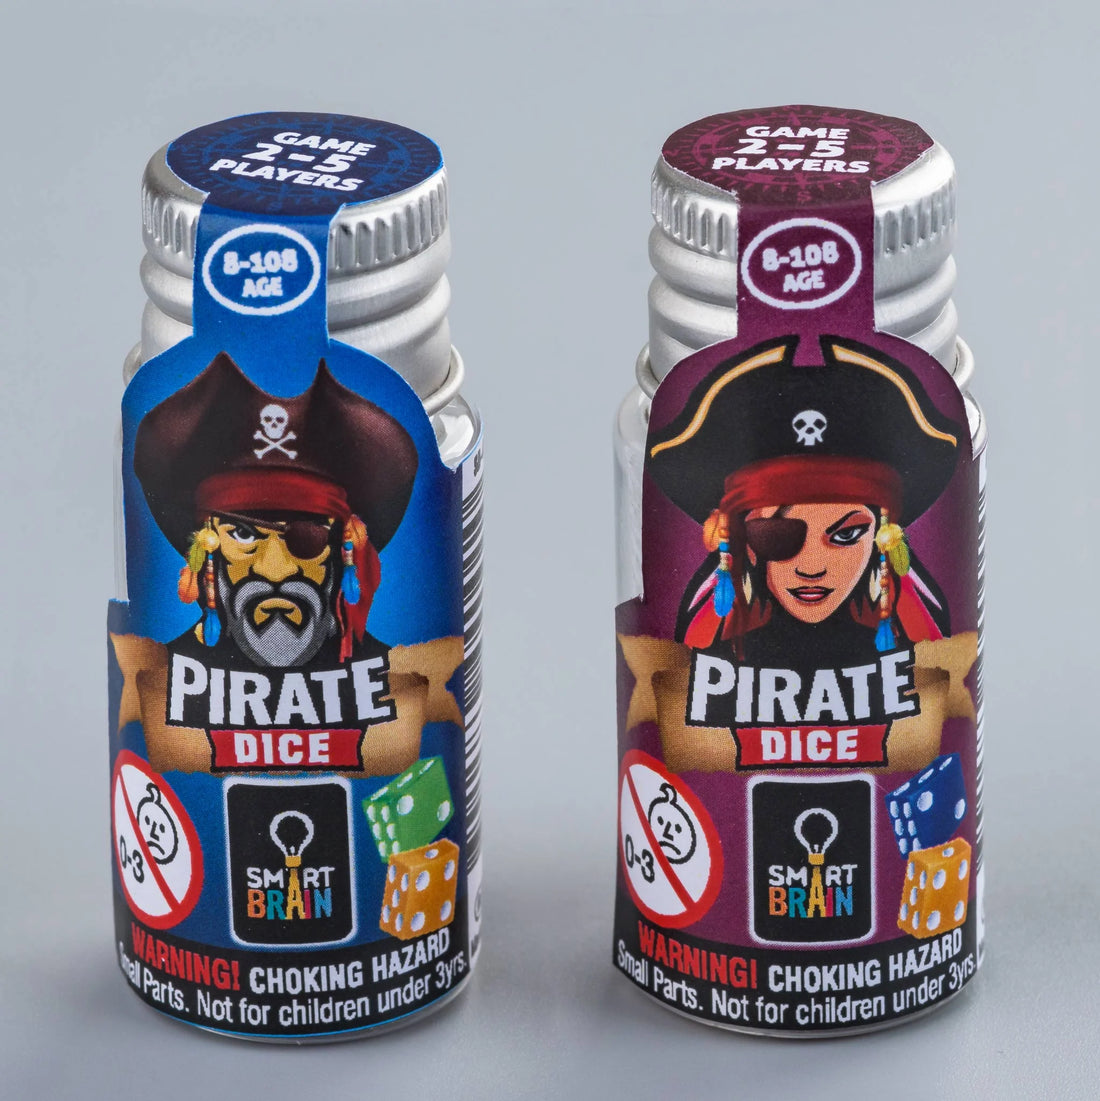 Pirate Dice Bottle Preview #3